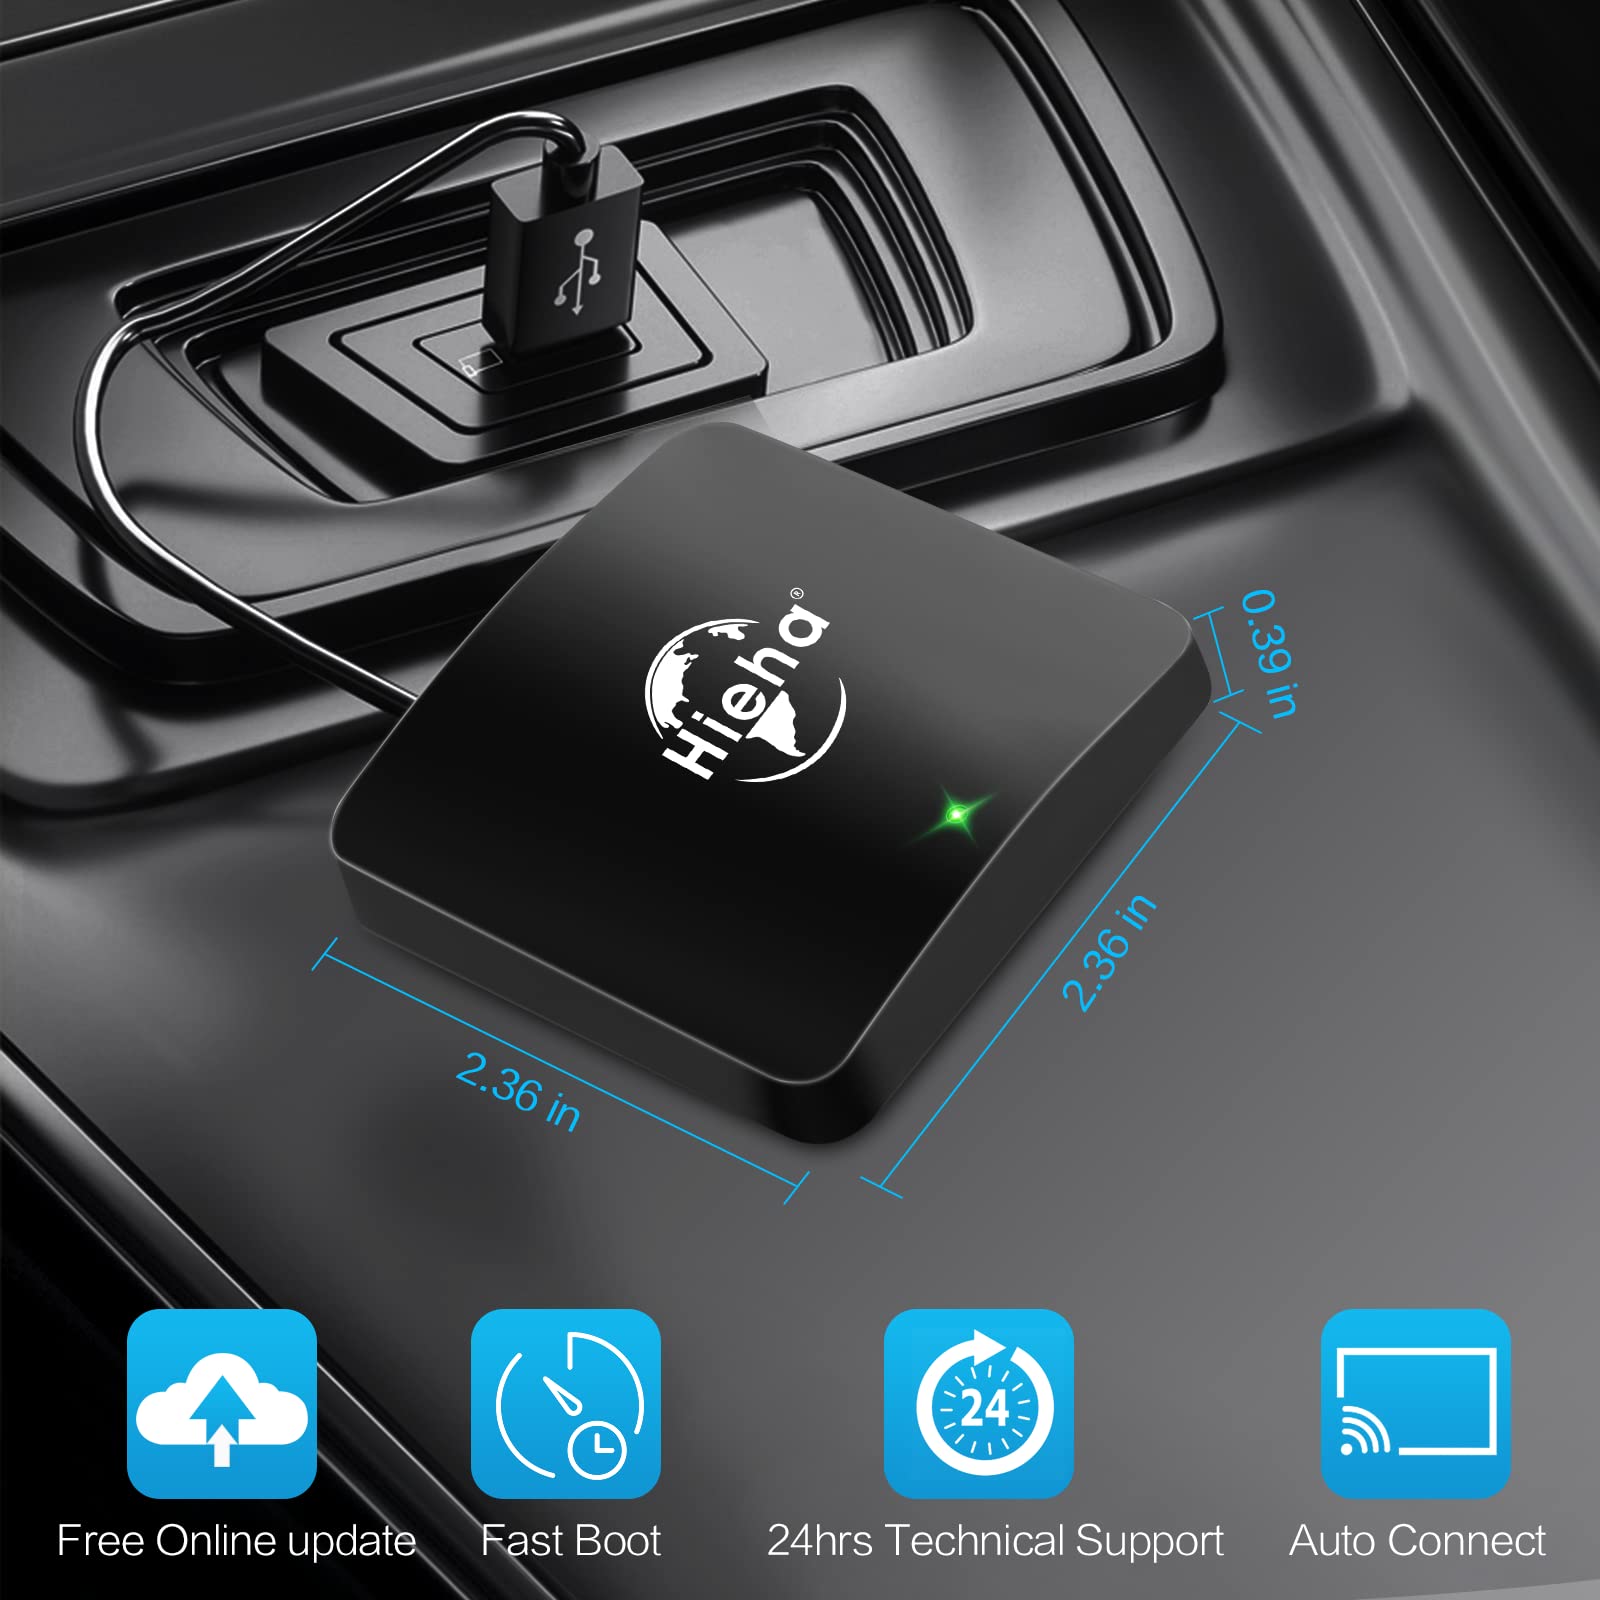 Wireless CarPlay Adapter 2023 Newest Version, Hieha Wireless Apple CarPlay Dongle & 5.8GHz WiFi & 5G WiFi Online Update Plug & Play for OEM Factory Wired CarPlay Cars (Model Year: 2016 to 2023)